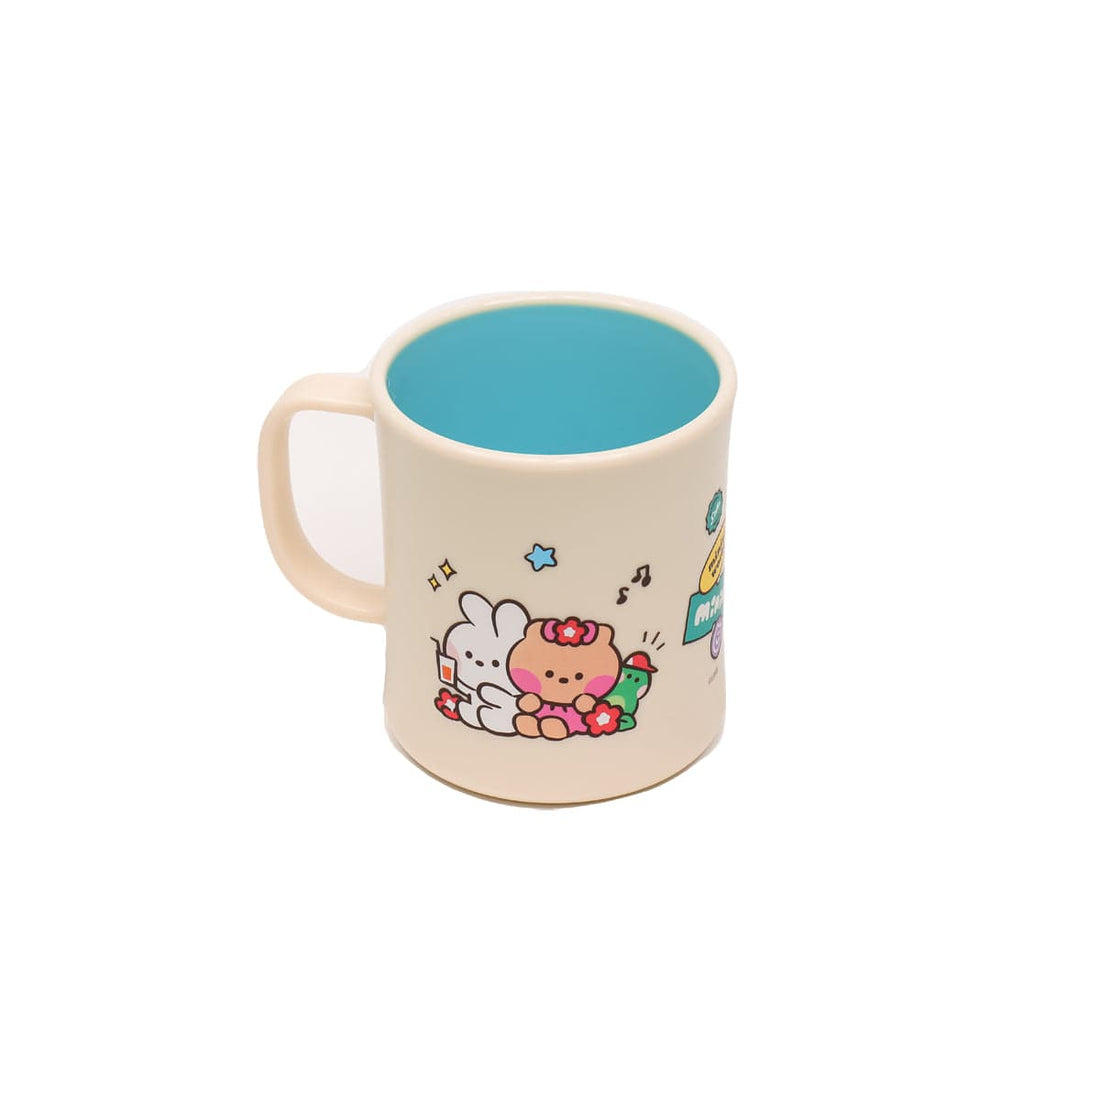 LINE FRIENDS LIVING DOUBLE COLORED MUG CUP LINE FRIENDS minini DOUBLE COLORED MUG CUP